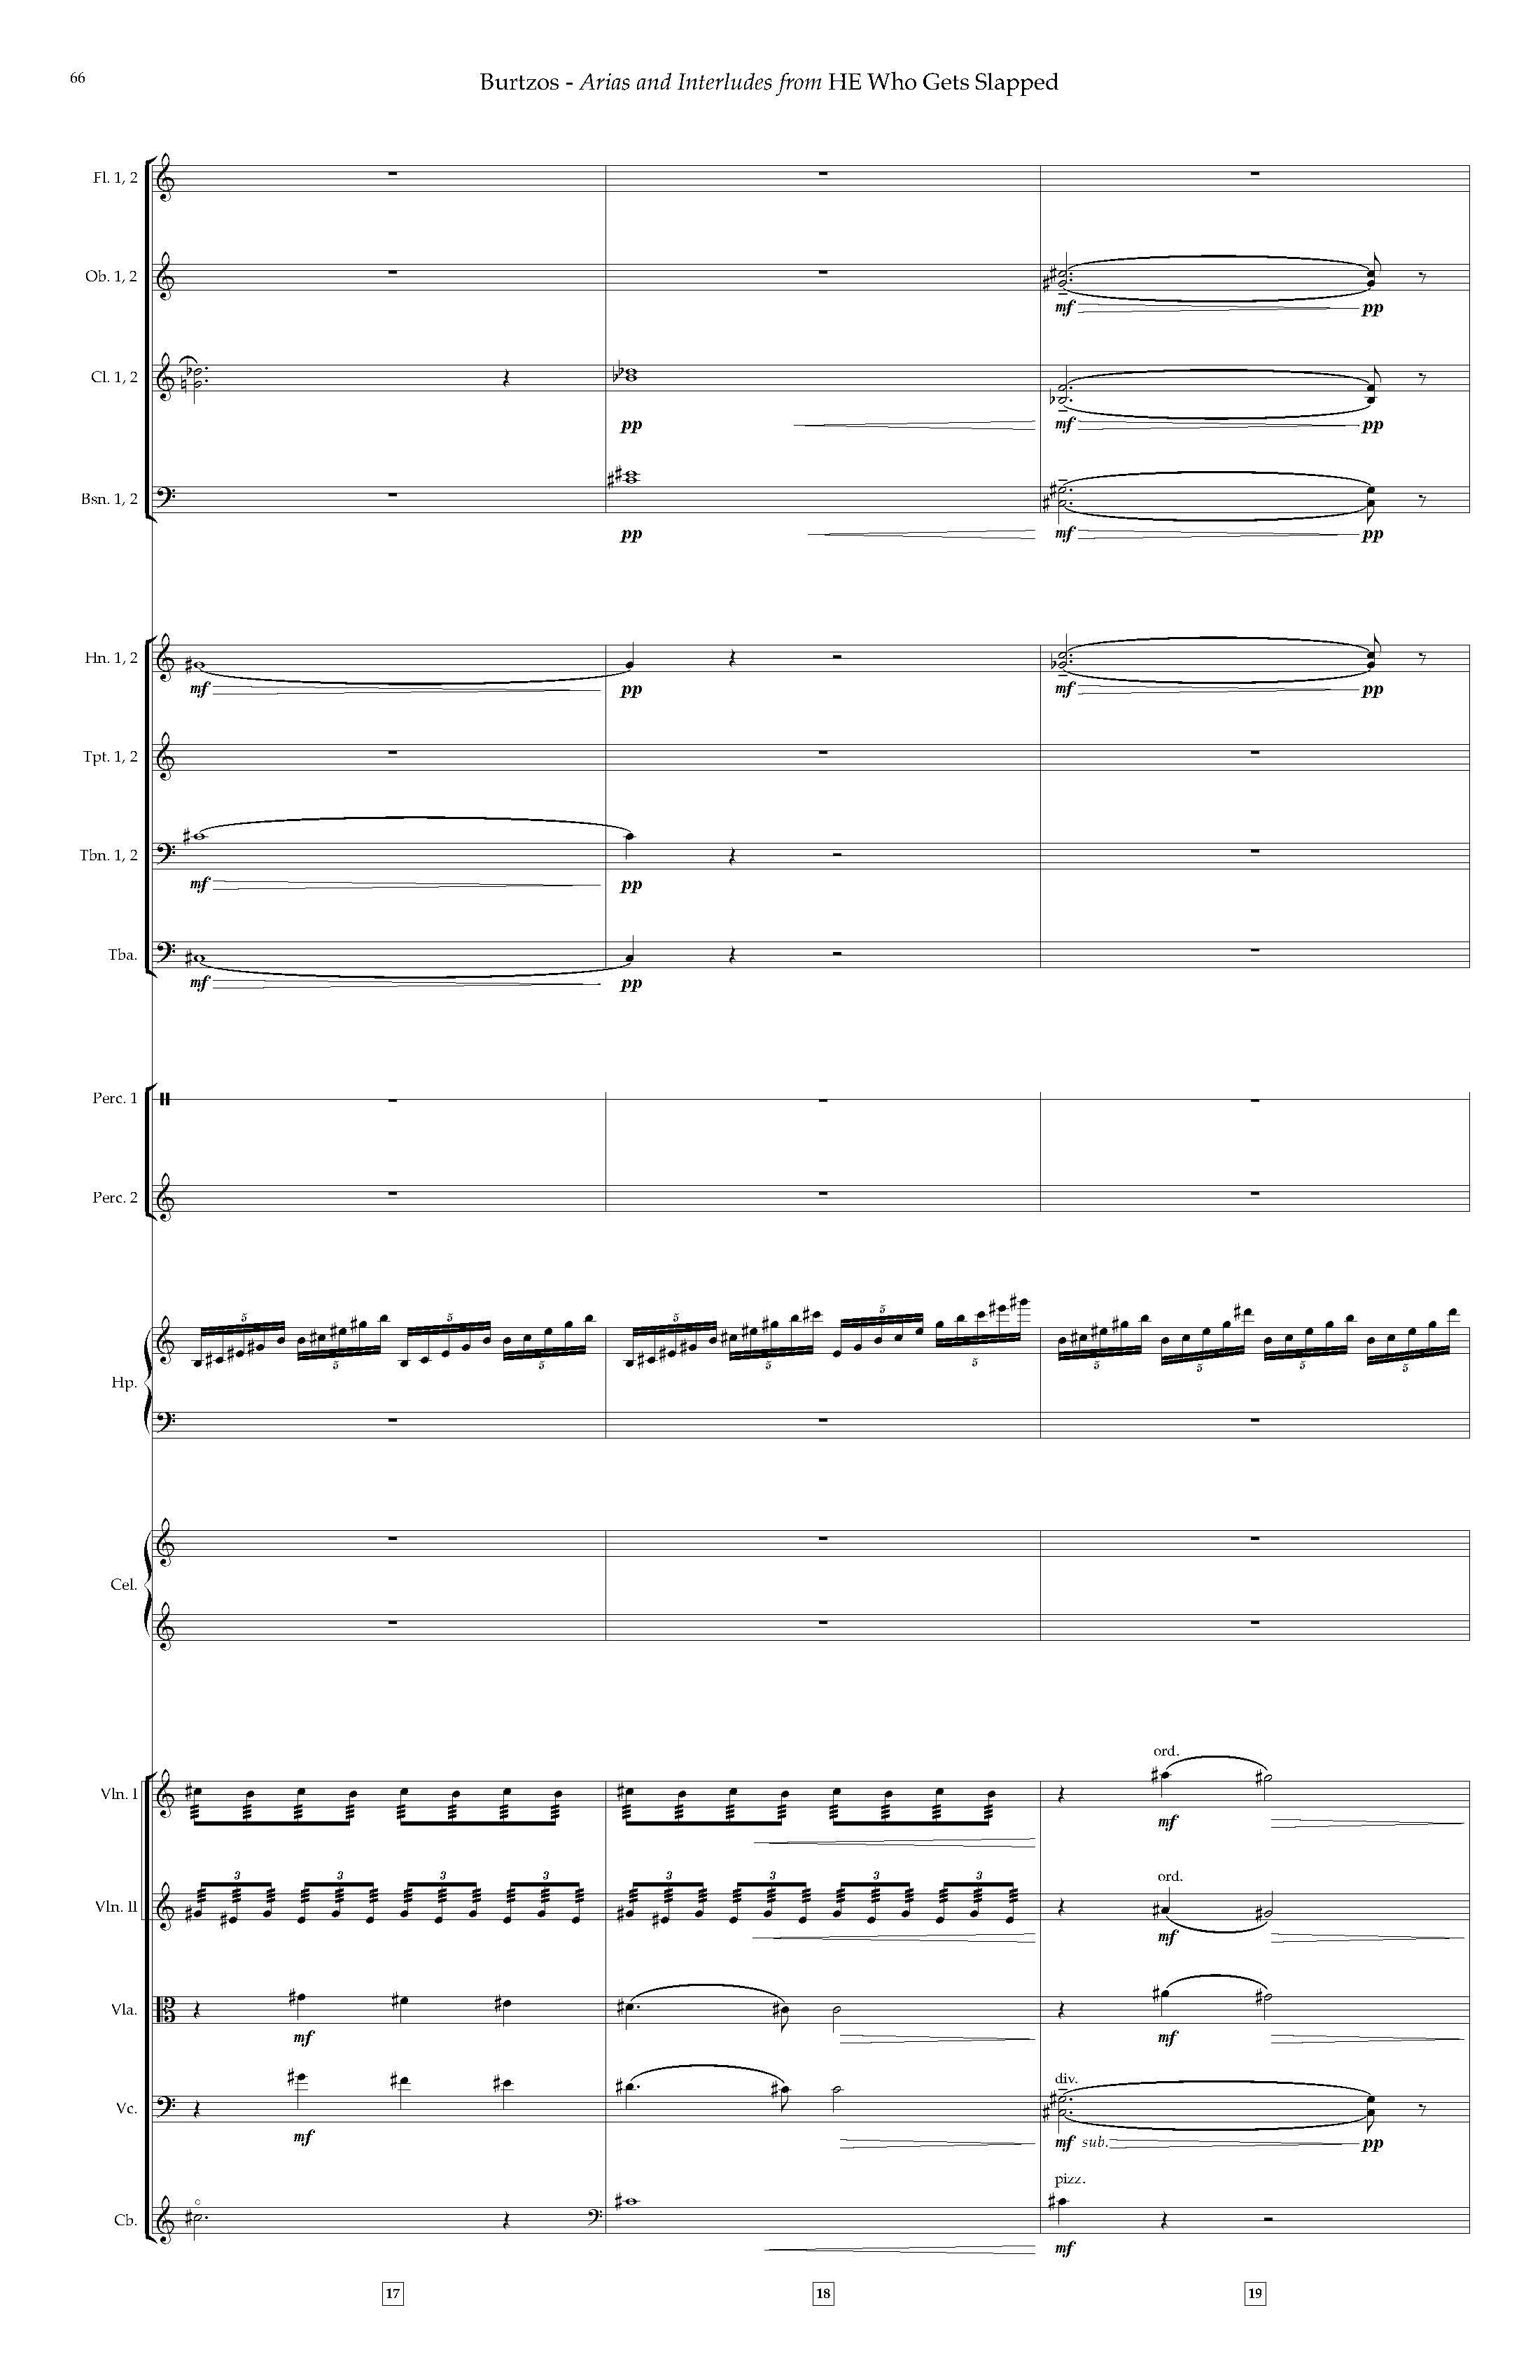 Arias and Interludes from HWGS - Complete Score_Page_72.jpg